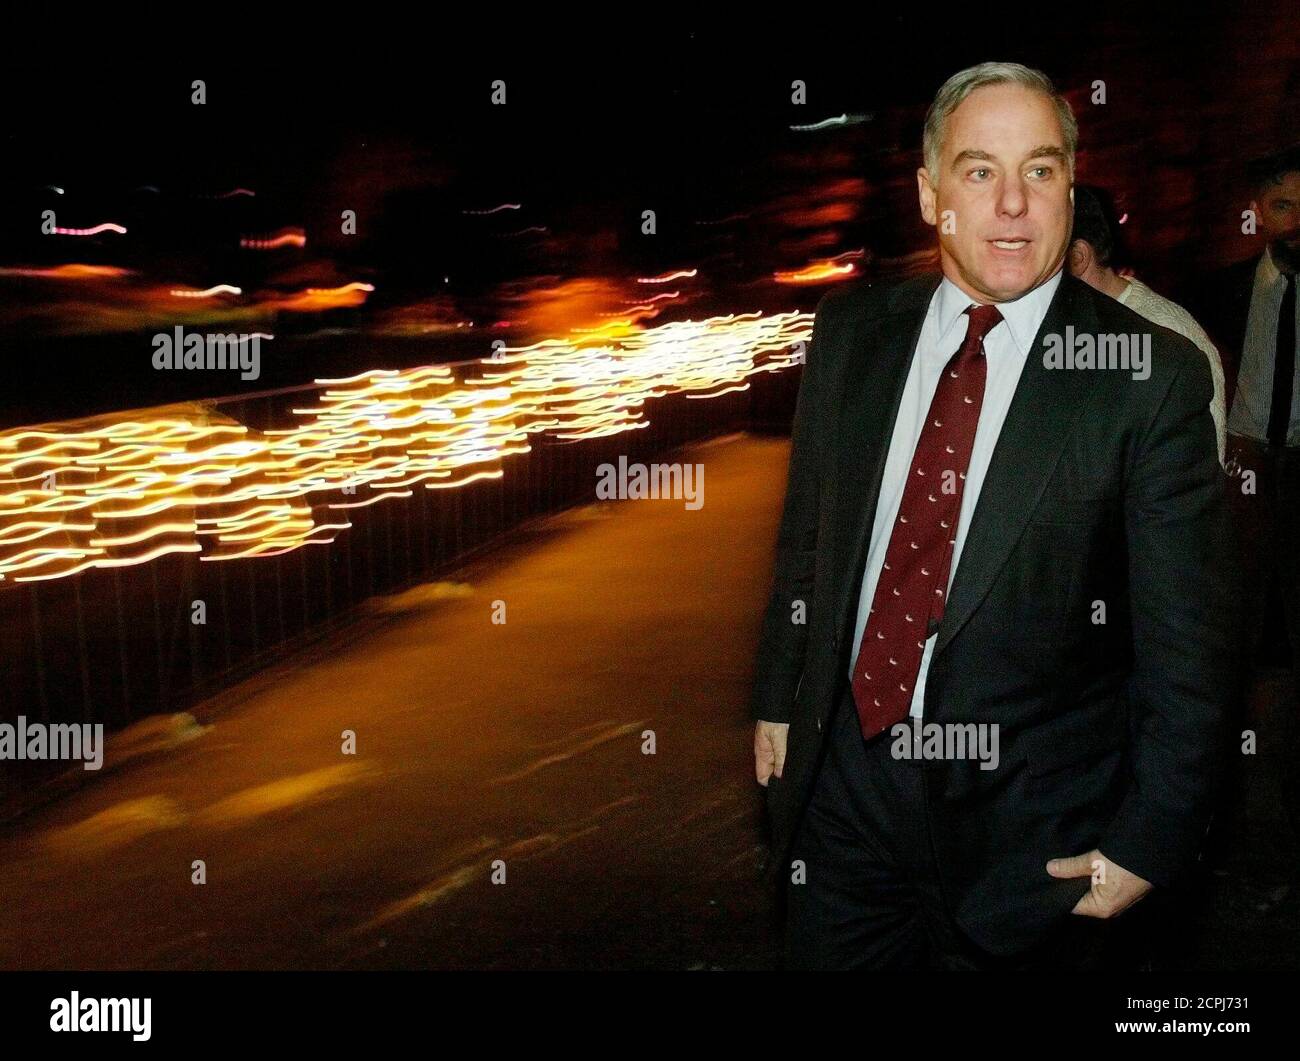 U.S. Democratic presidential candidate Howard Dean rushes past a light display outside a hotel after speaking along with other Democratic candidates at the New Hampshire Democratic Party's '100 Club Dinner' in Nashua, New Hampshire January 24, 2004. REUTERS/Jim Bourg  JRB Stock Photo